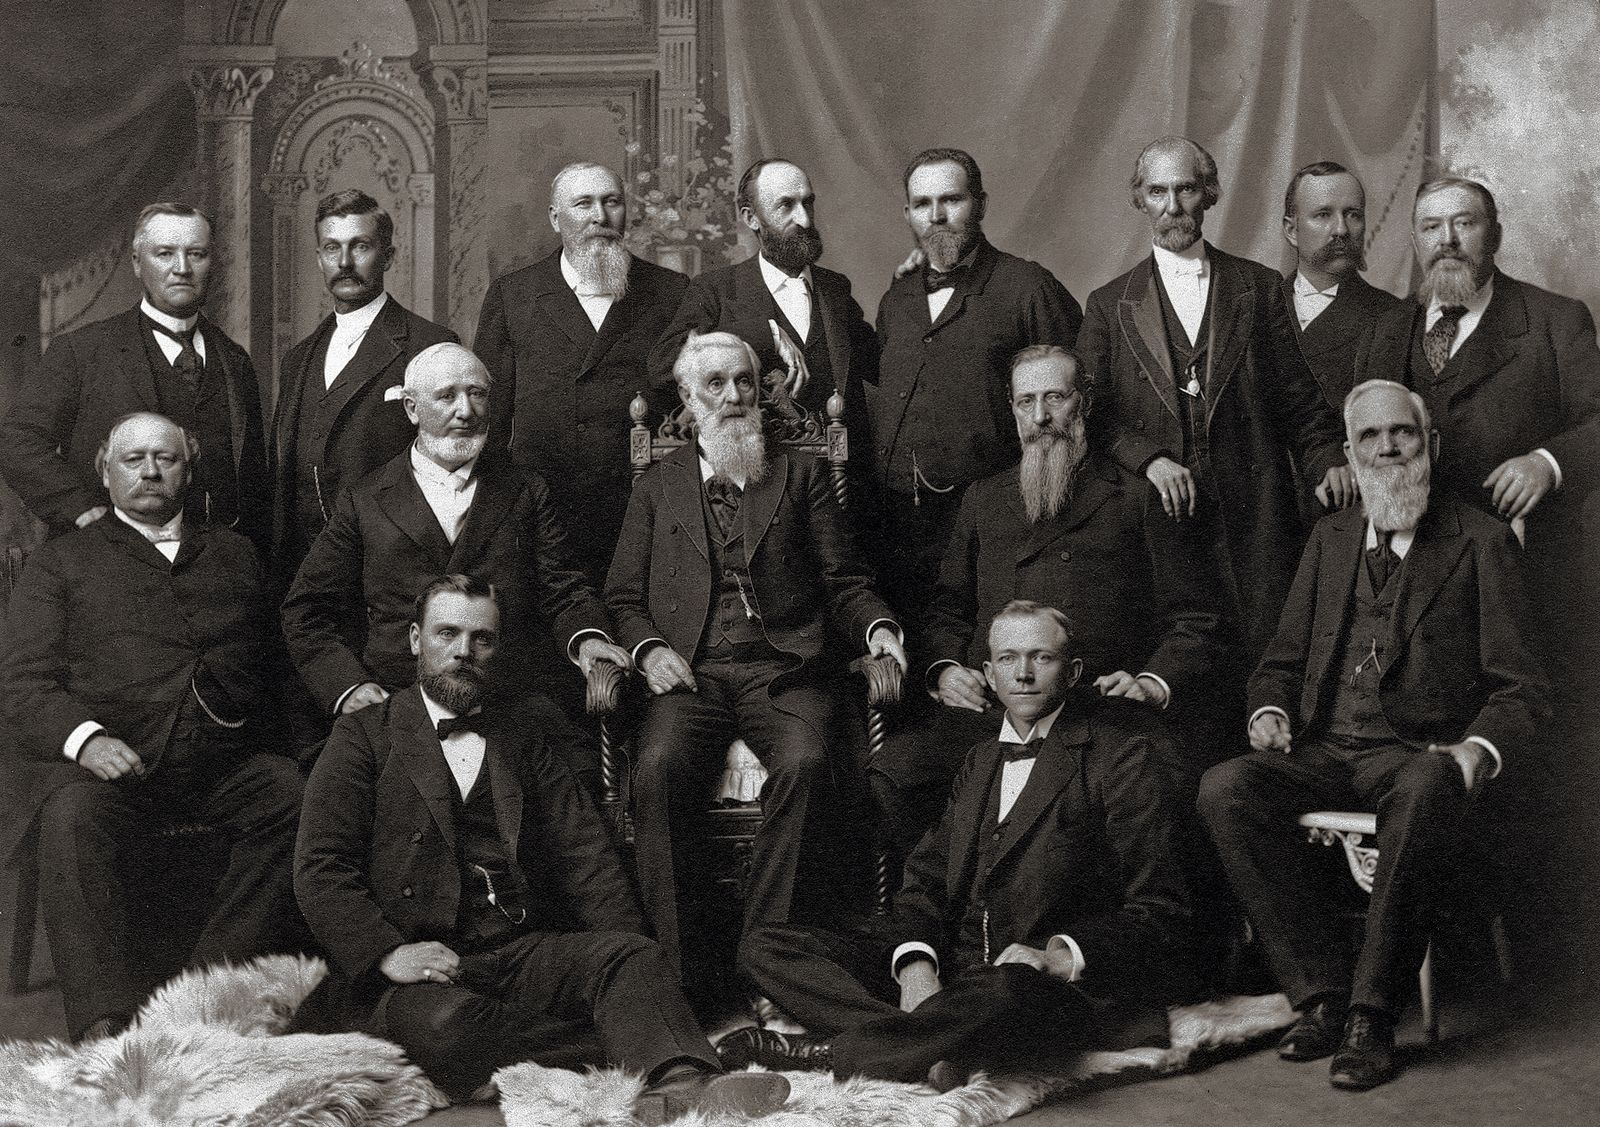 The Quorum of the Twelve Apostles in 1898. Standing, left to right: Anthon H. Lund, John W. Taylor, John Henry Smith, Heber J. Grant, Brigham Young Jr., George Teasdale, Rudger Clawson, and Marriner W. Merrill. Sitting in middle row: Francis M. Lyman, George Q. Cannon, Lorenzo Snow, Joseph F. Smith, and Franklin D. Richards. Sitting in bottom row: Matthias F. Cowley and Abraham O. Woodruff. Teachings of Presidents of the Church: Lorenzo Snow (2012), 28